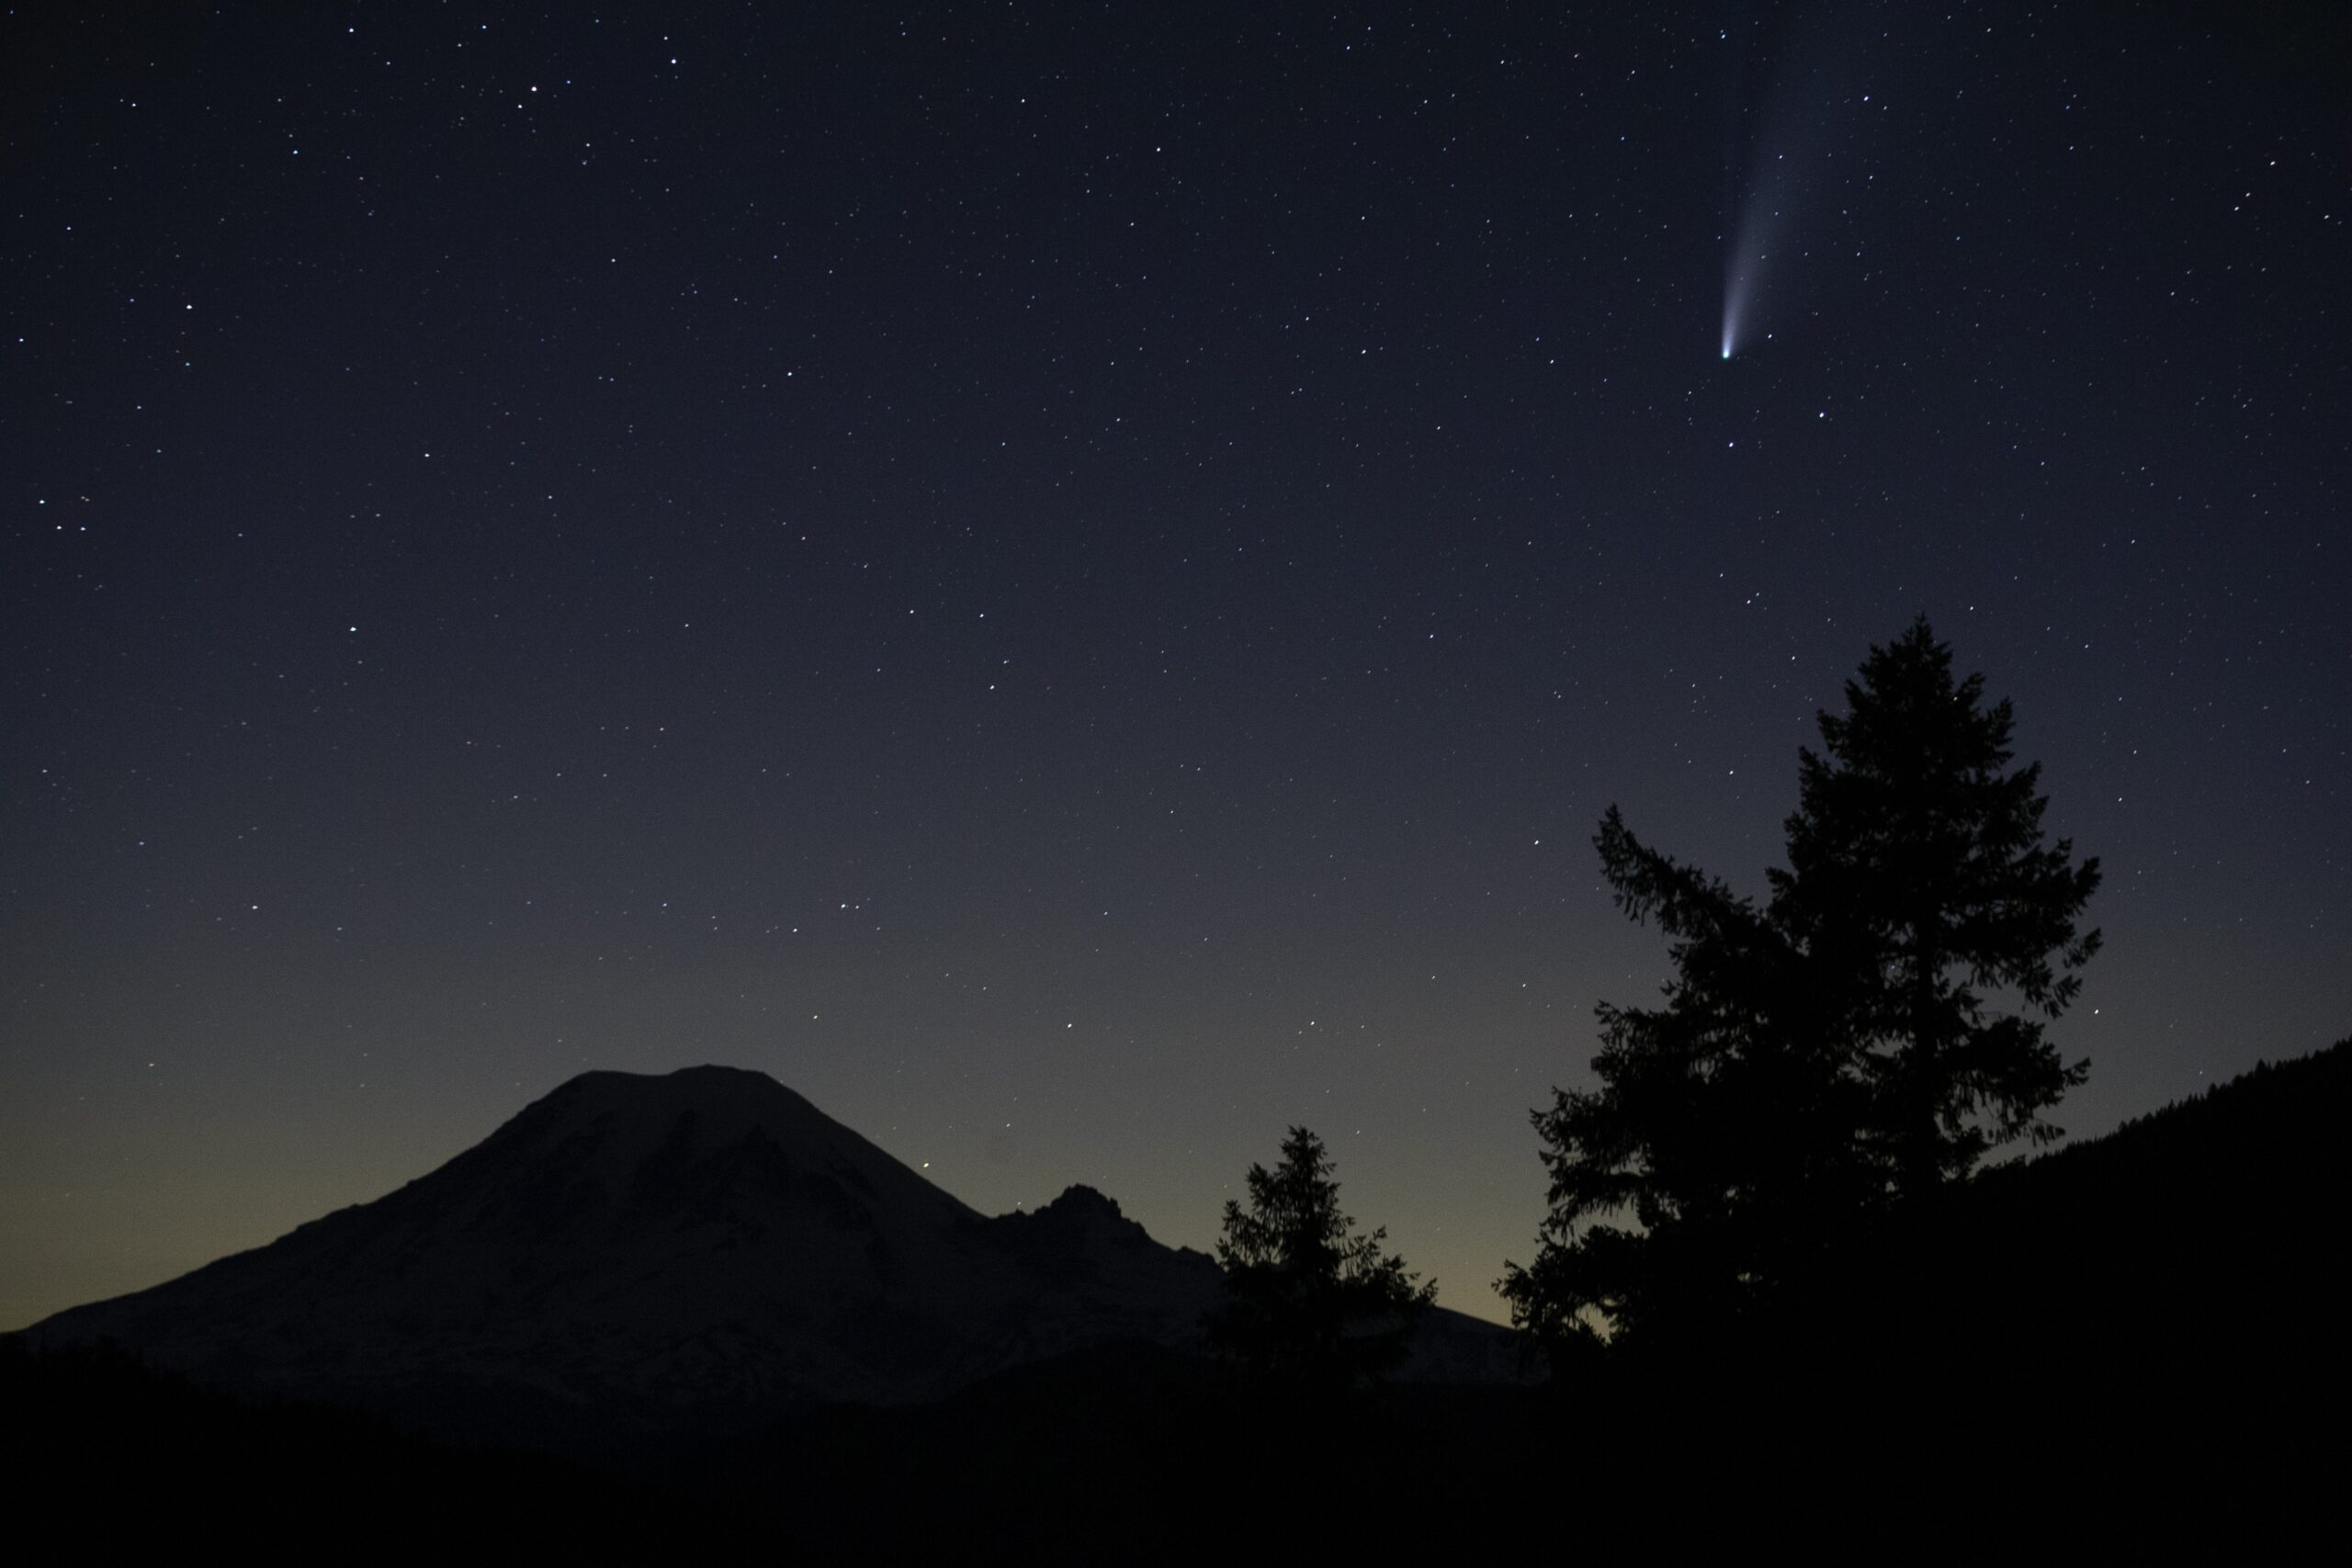 The Comet Neowise appears in the night sky above Mount Rainier, Saturday, July 18, 2020, near Packwood, Wash